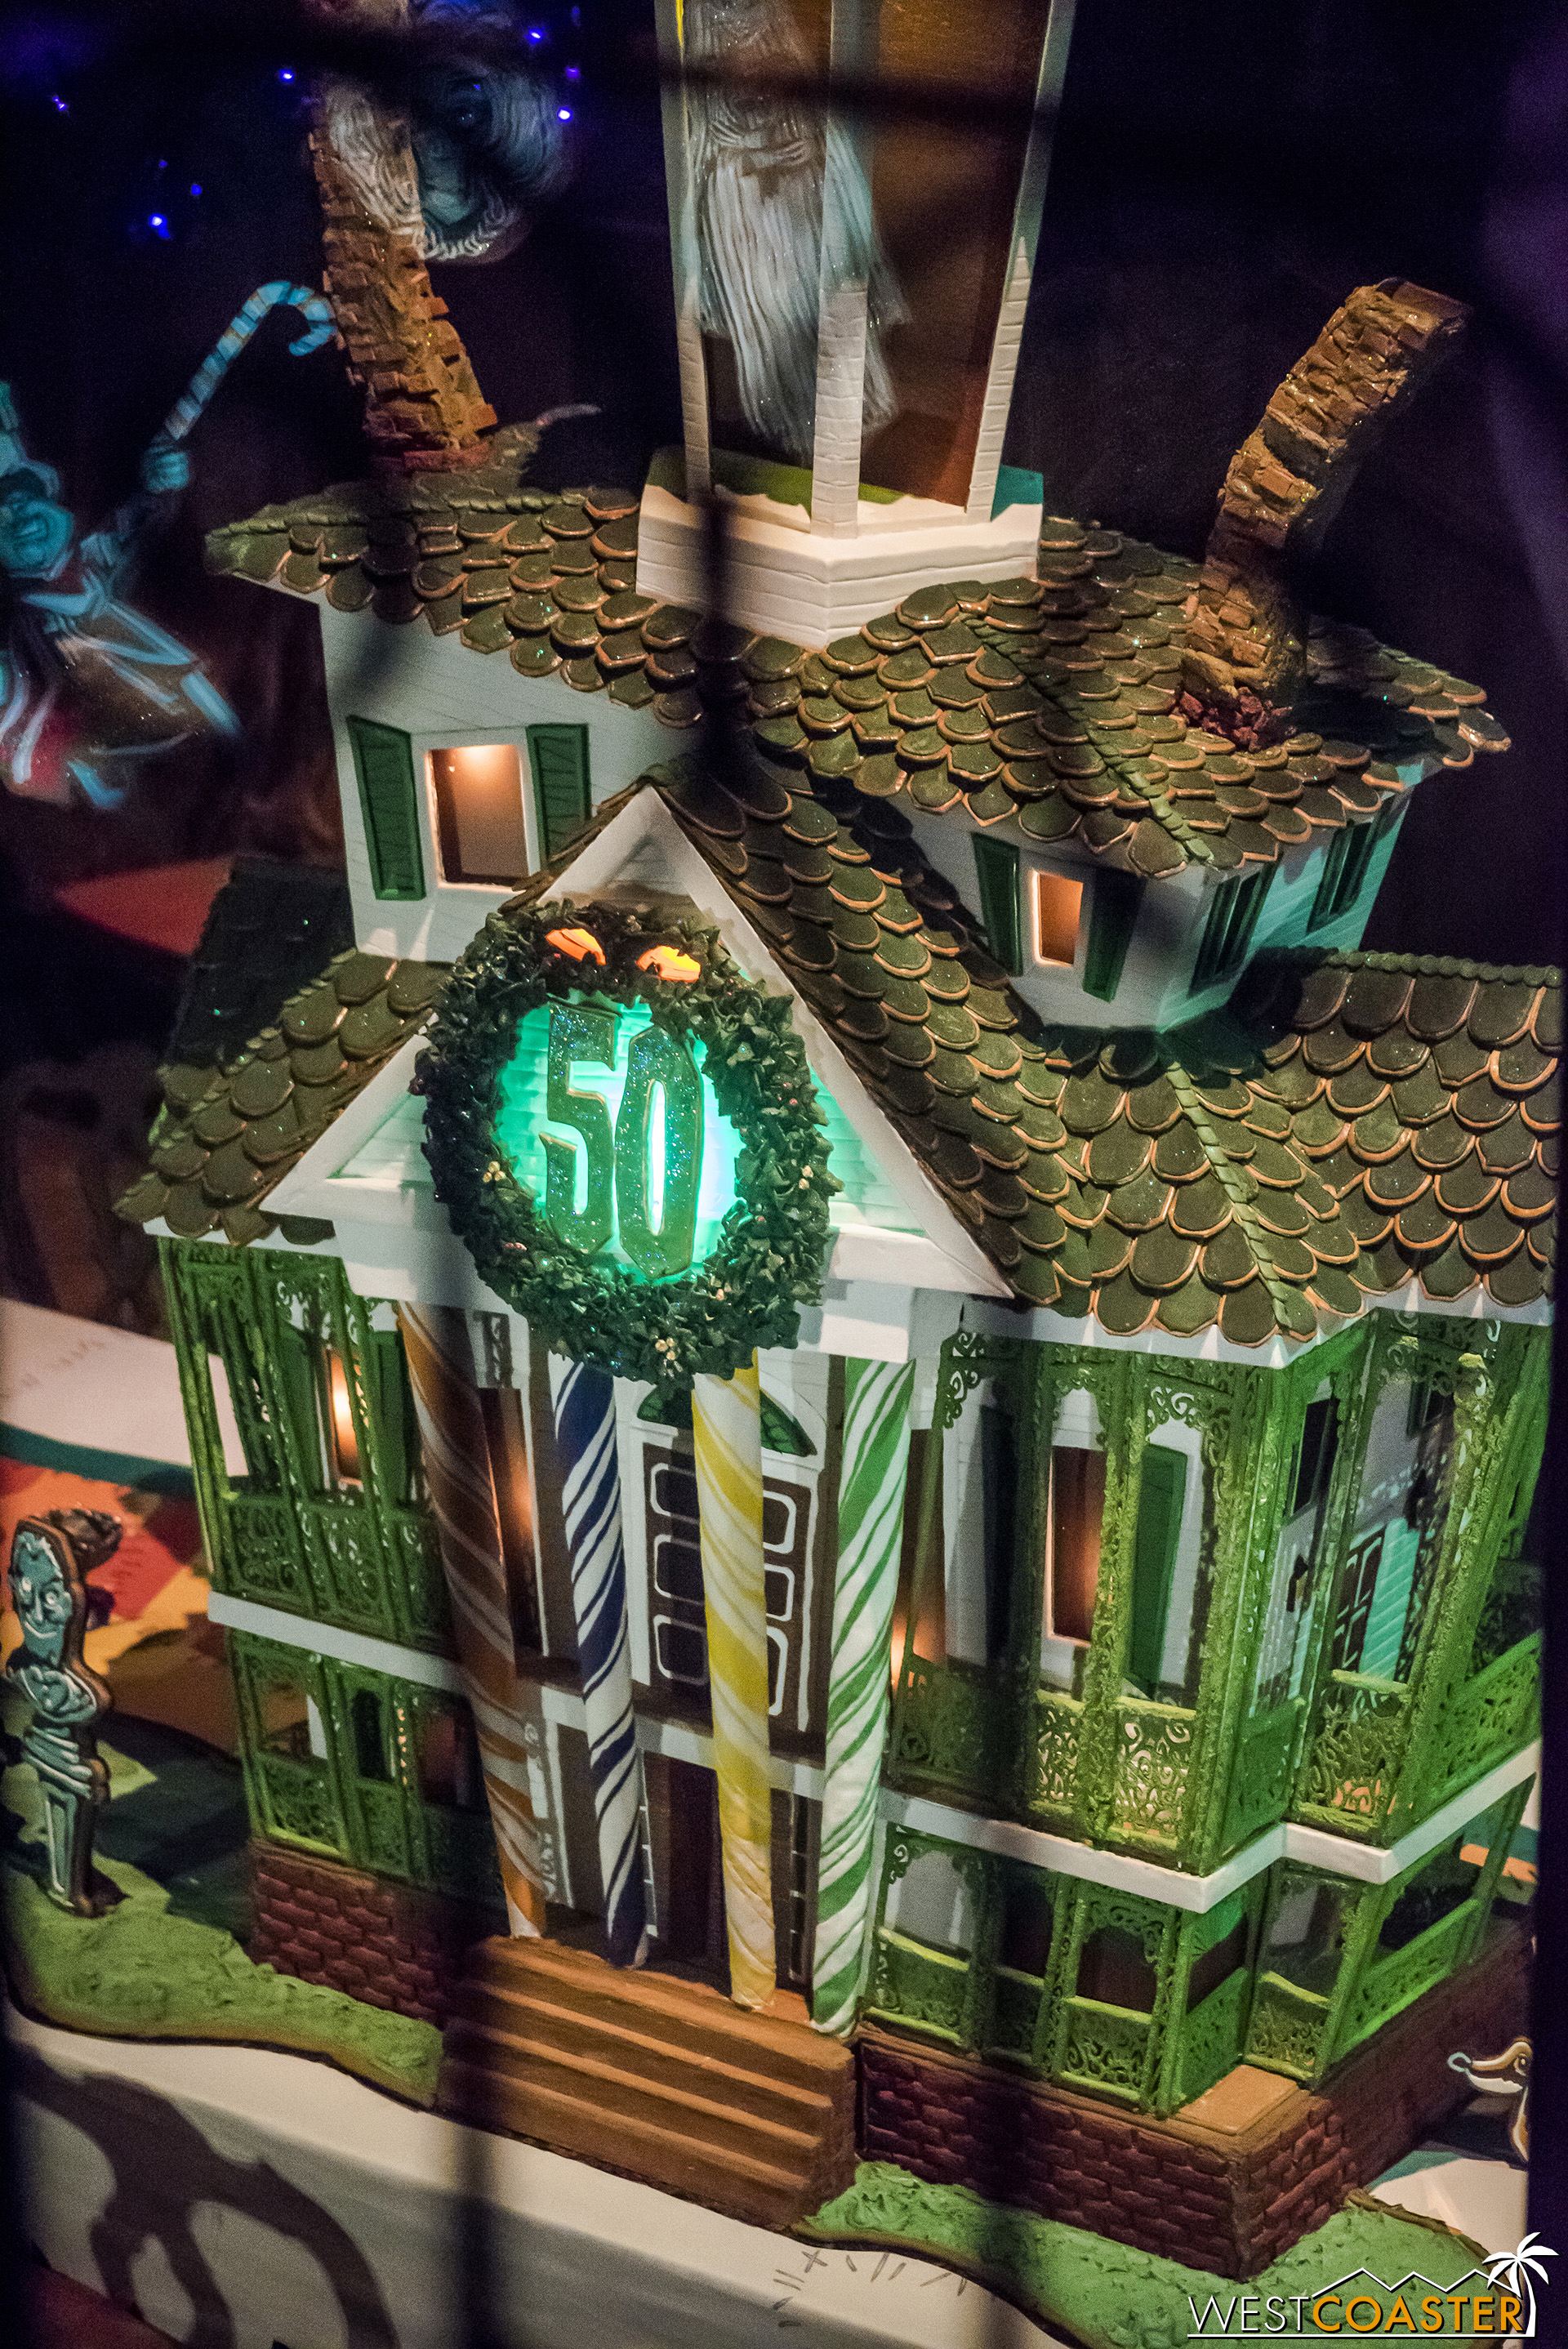  And here it is, the Haunted Mansion gingerbread house! 